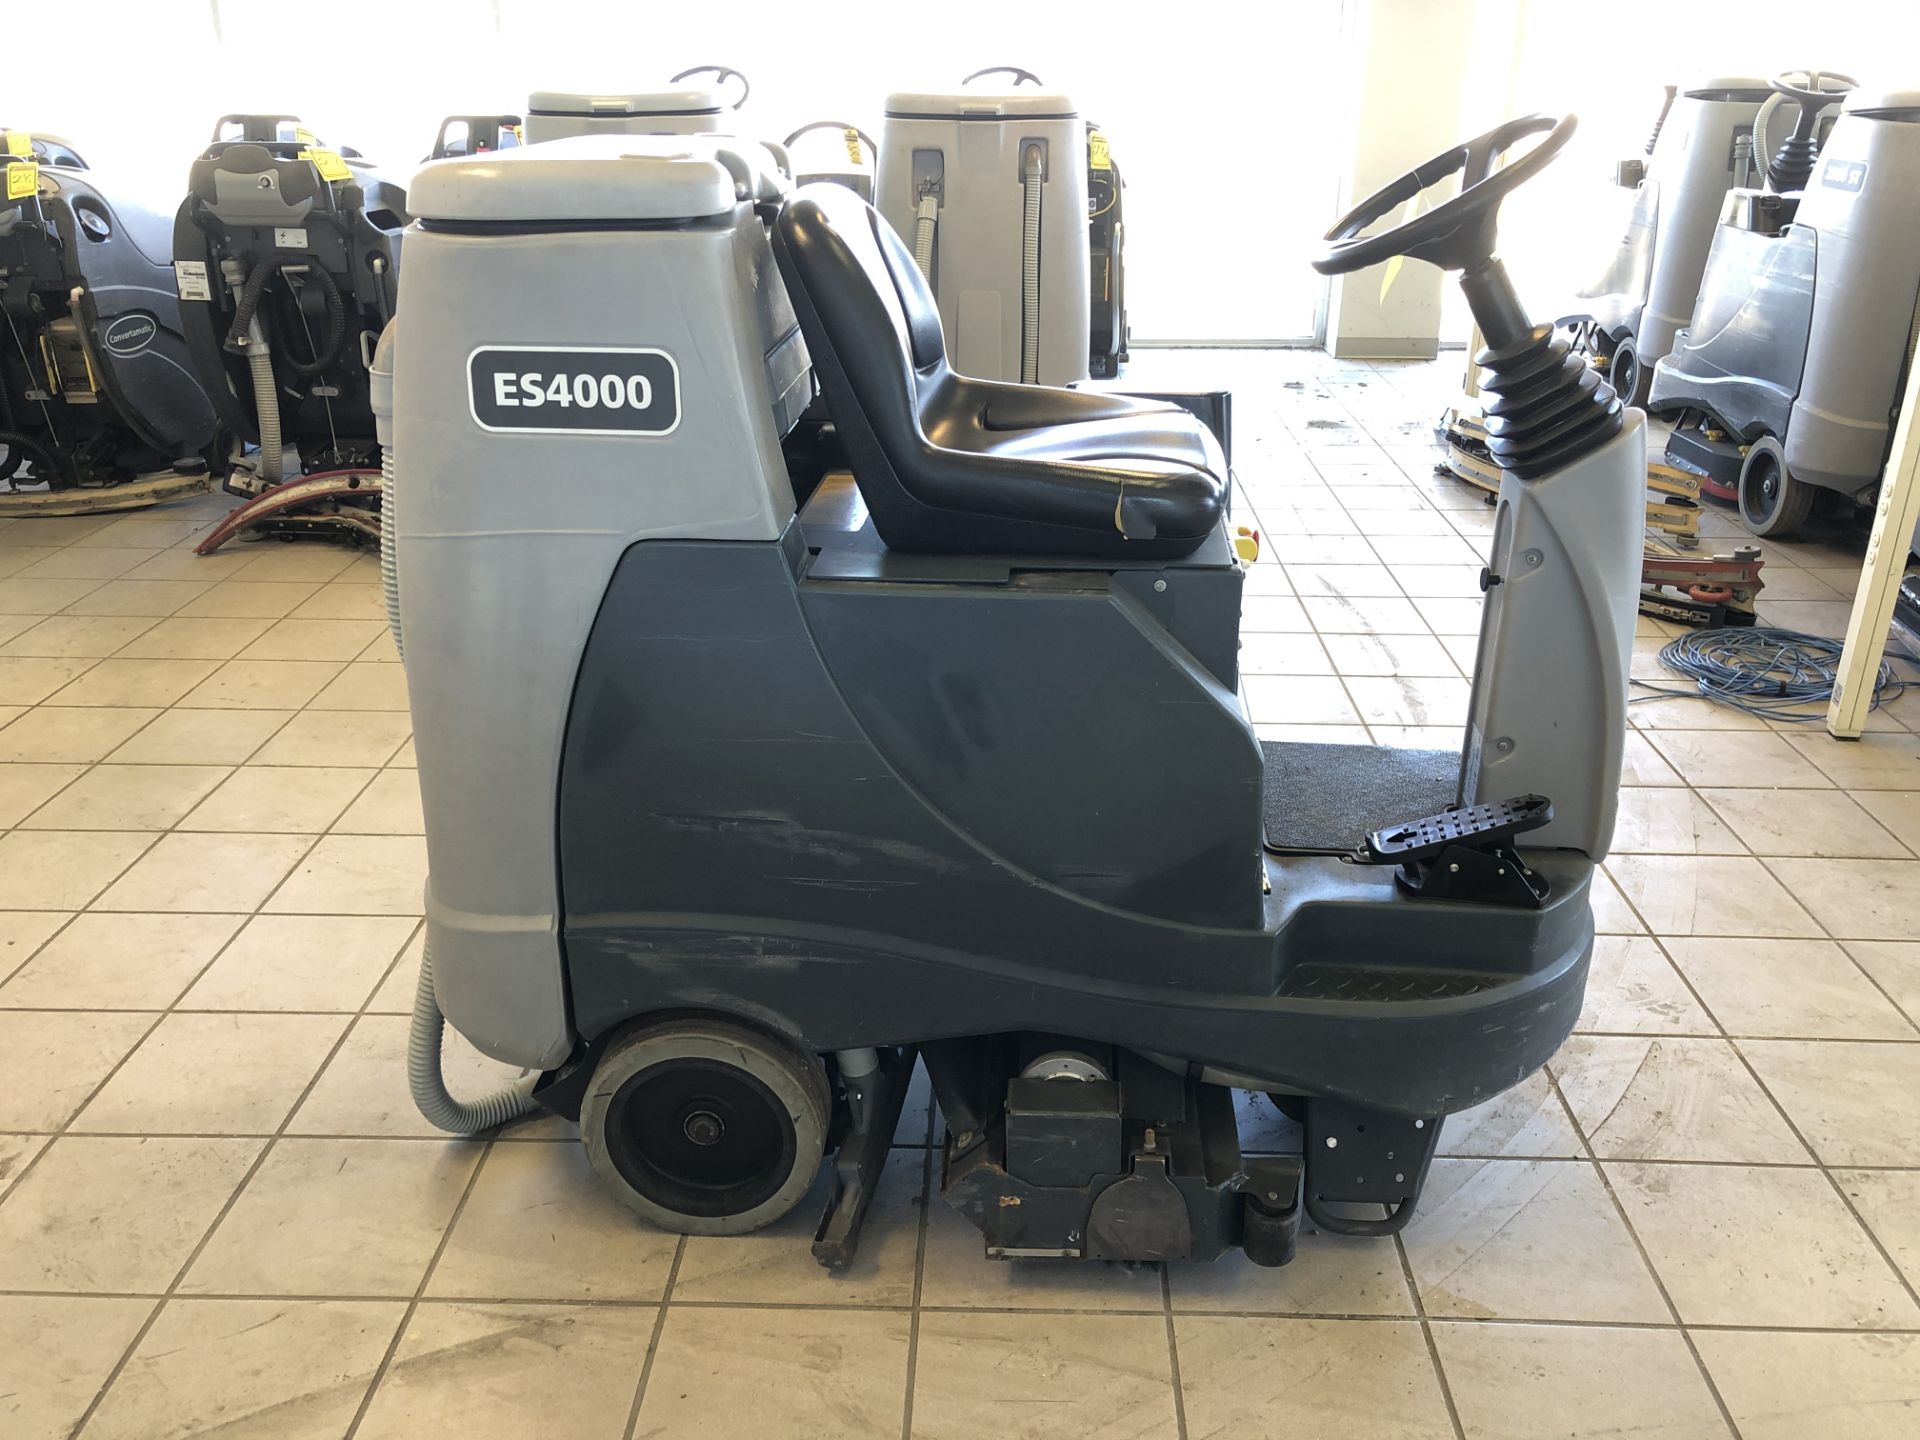 2016 ADVANCE RIDE-ON FLOOR SCRUBBER, MODEL: ES4000, S/N: 3000178054, 24-VOLT, WEIGHT: 1,447-LBS., - Image 4 of 9